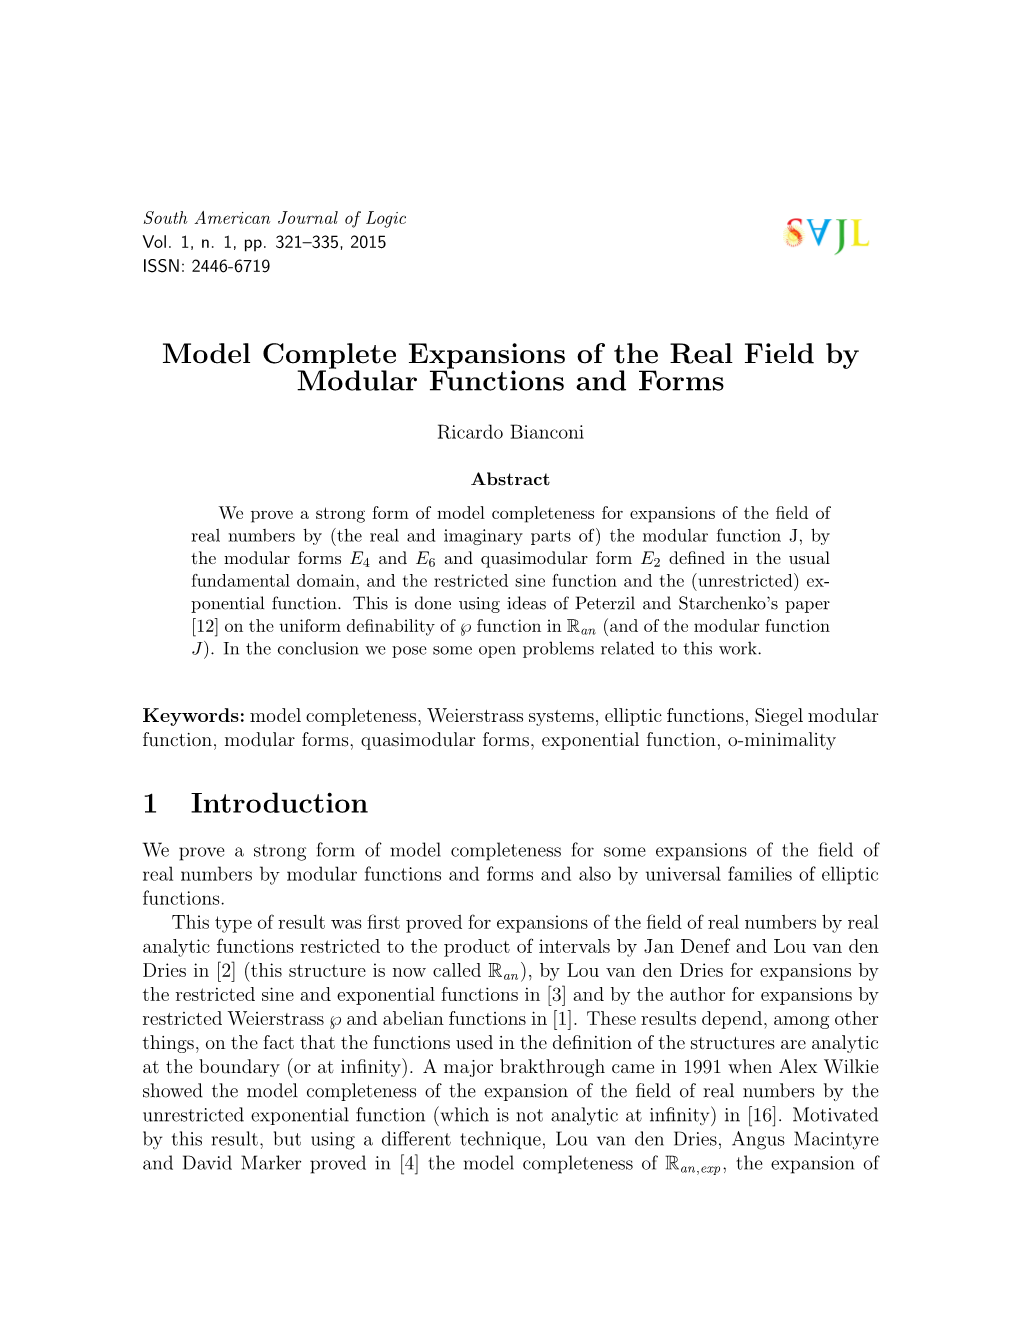 Model Complete Expansions of the Real Field by Modular Functions and Forms